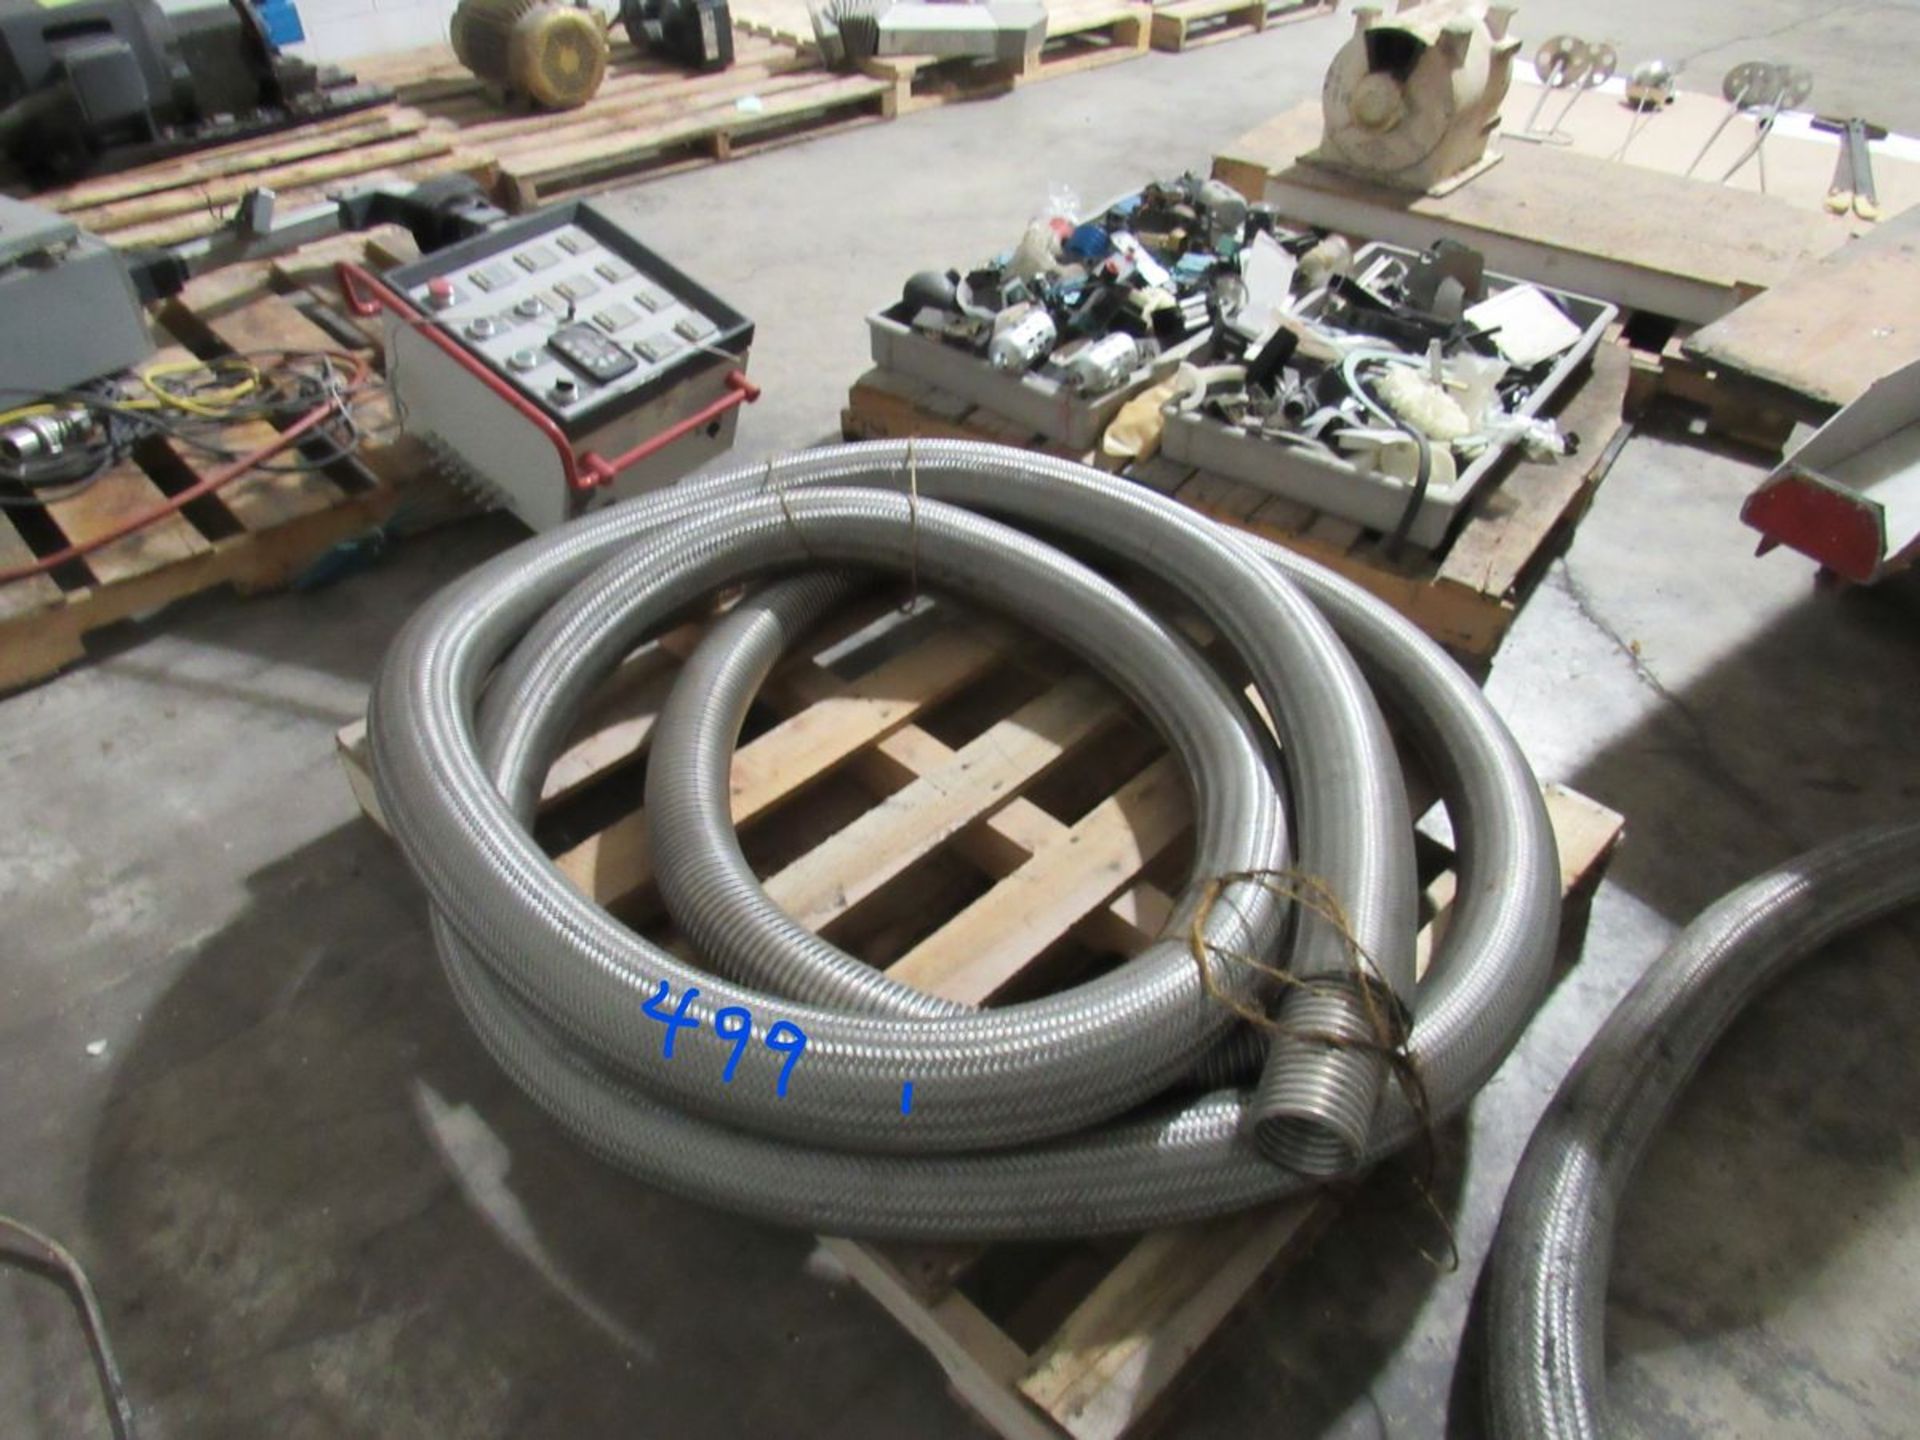 Approximately 30 ft of 3" diameter Stainless Steel Flexible Hose (Rigging and loading fees